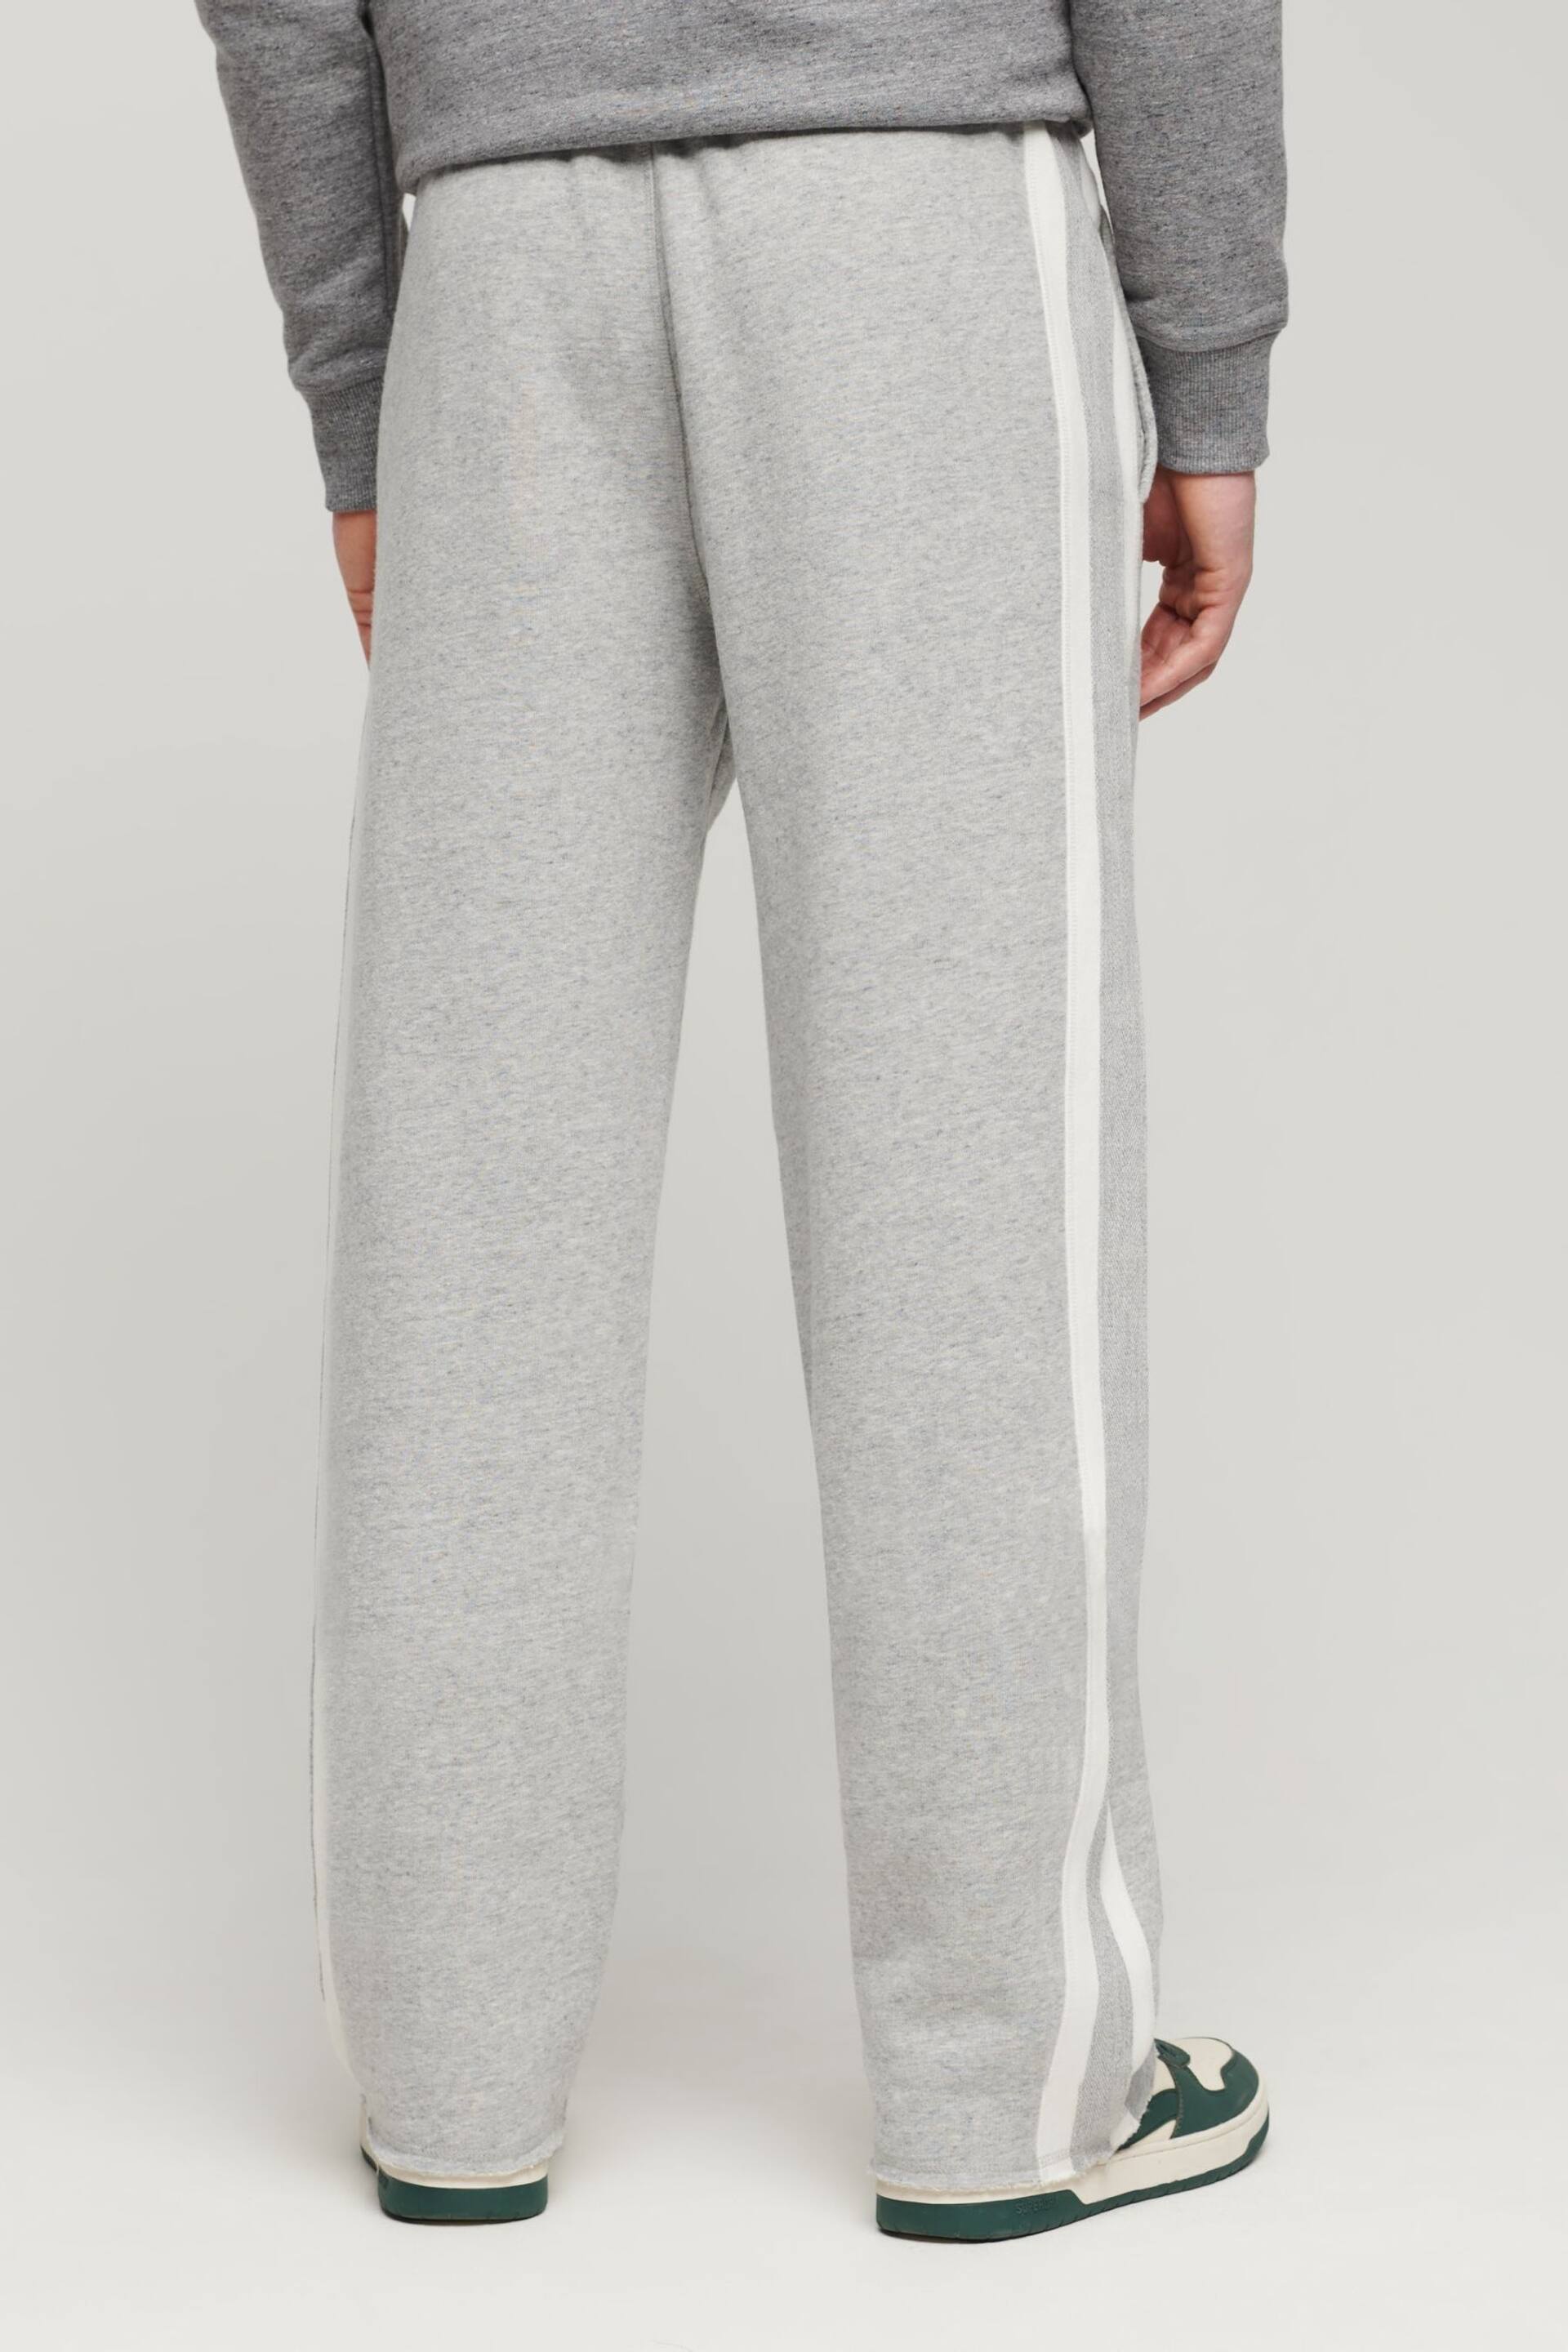 Superdry Grey Essential Straight Joggers - Image 2 of 9